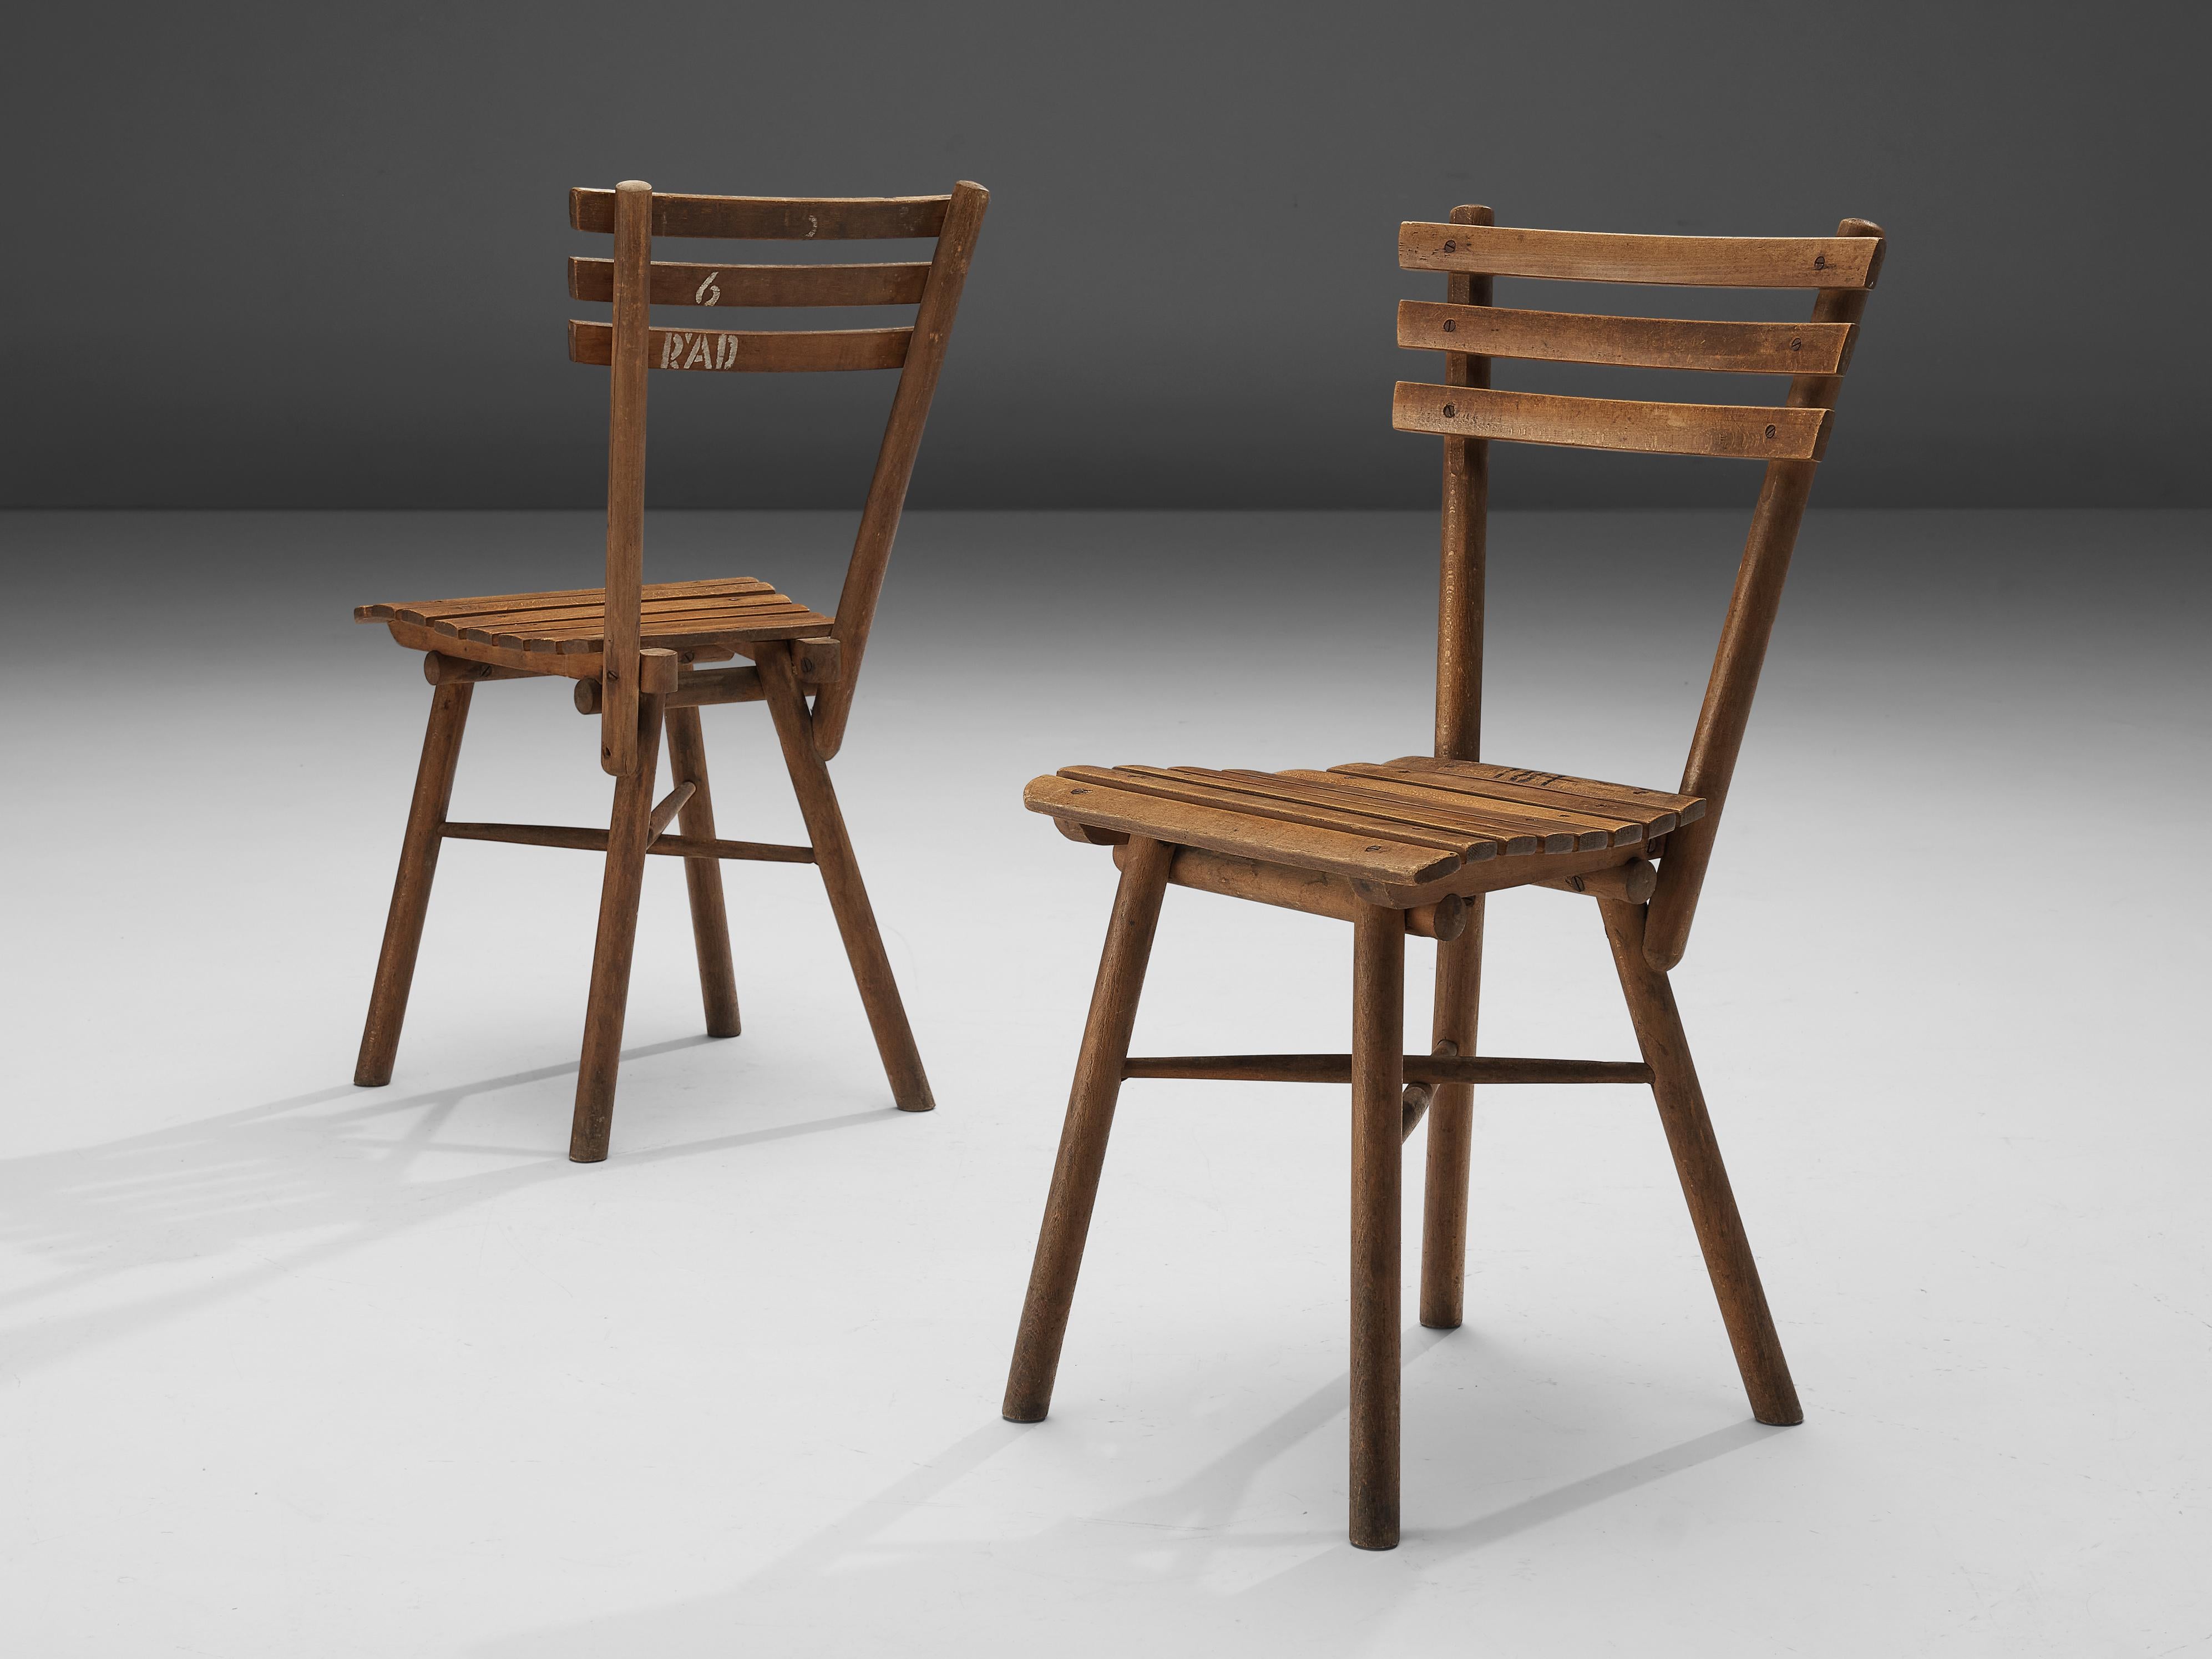 Thonet, side chairs, wood, Austria, 1950s

These for Thonet unusual chairs don’t feature the usual bentwood. Instead, they are made of separate parts. Seat and backrest are not upholstered but have a rhythmic construction of parallel wood slats.